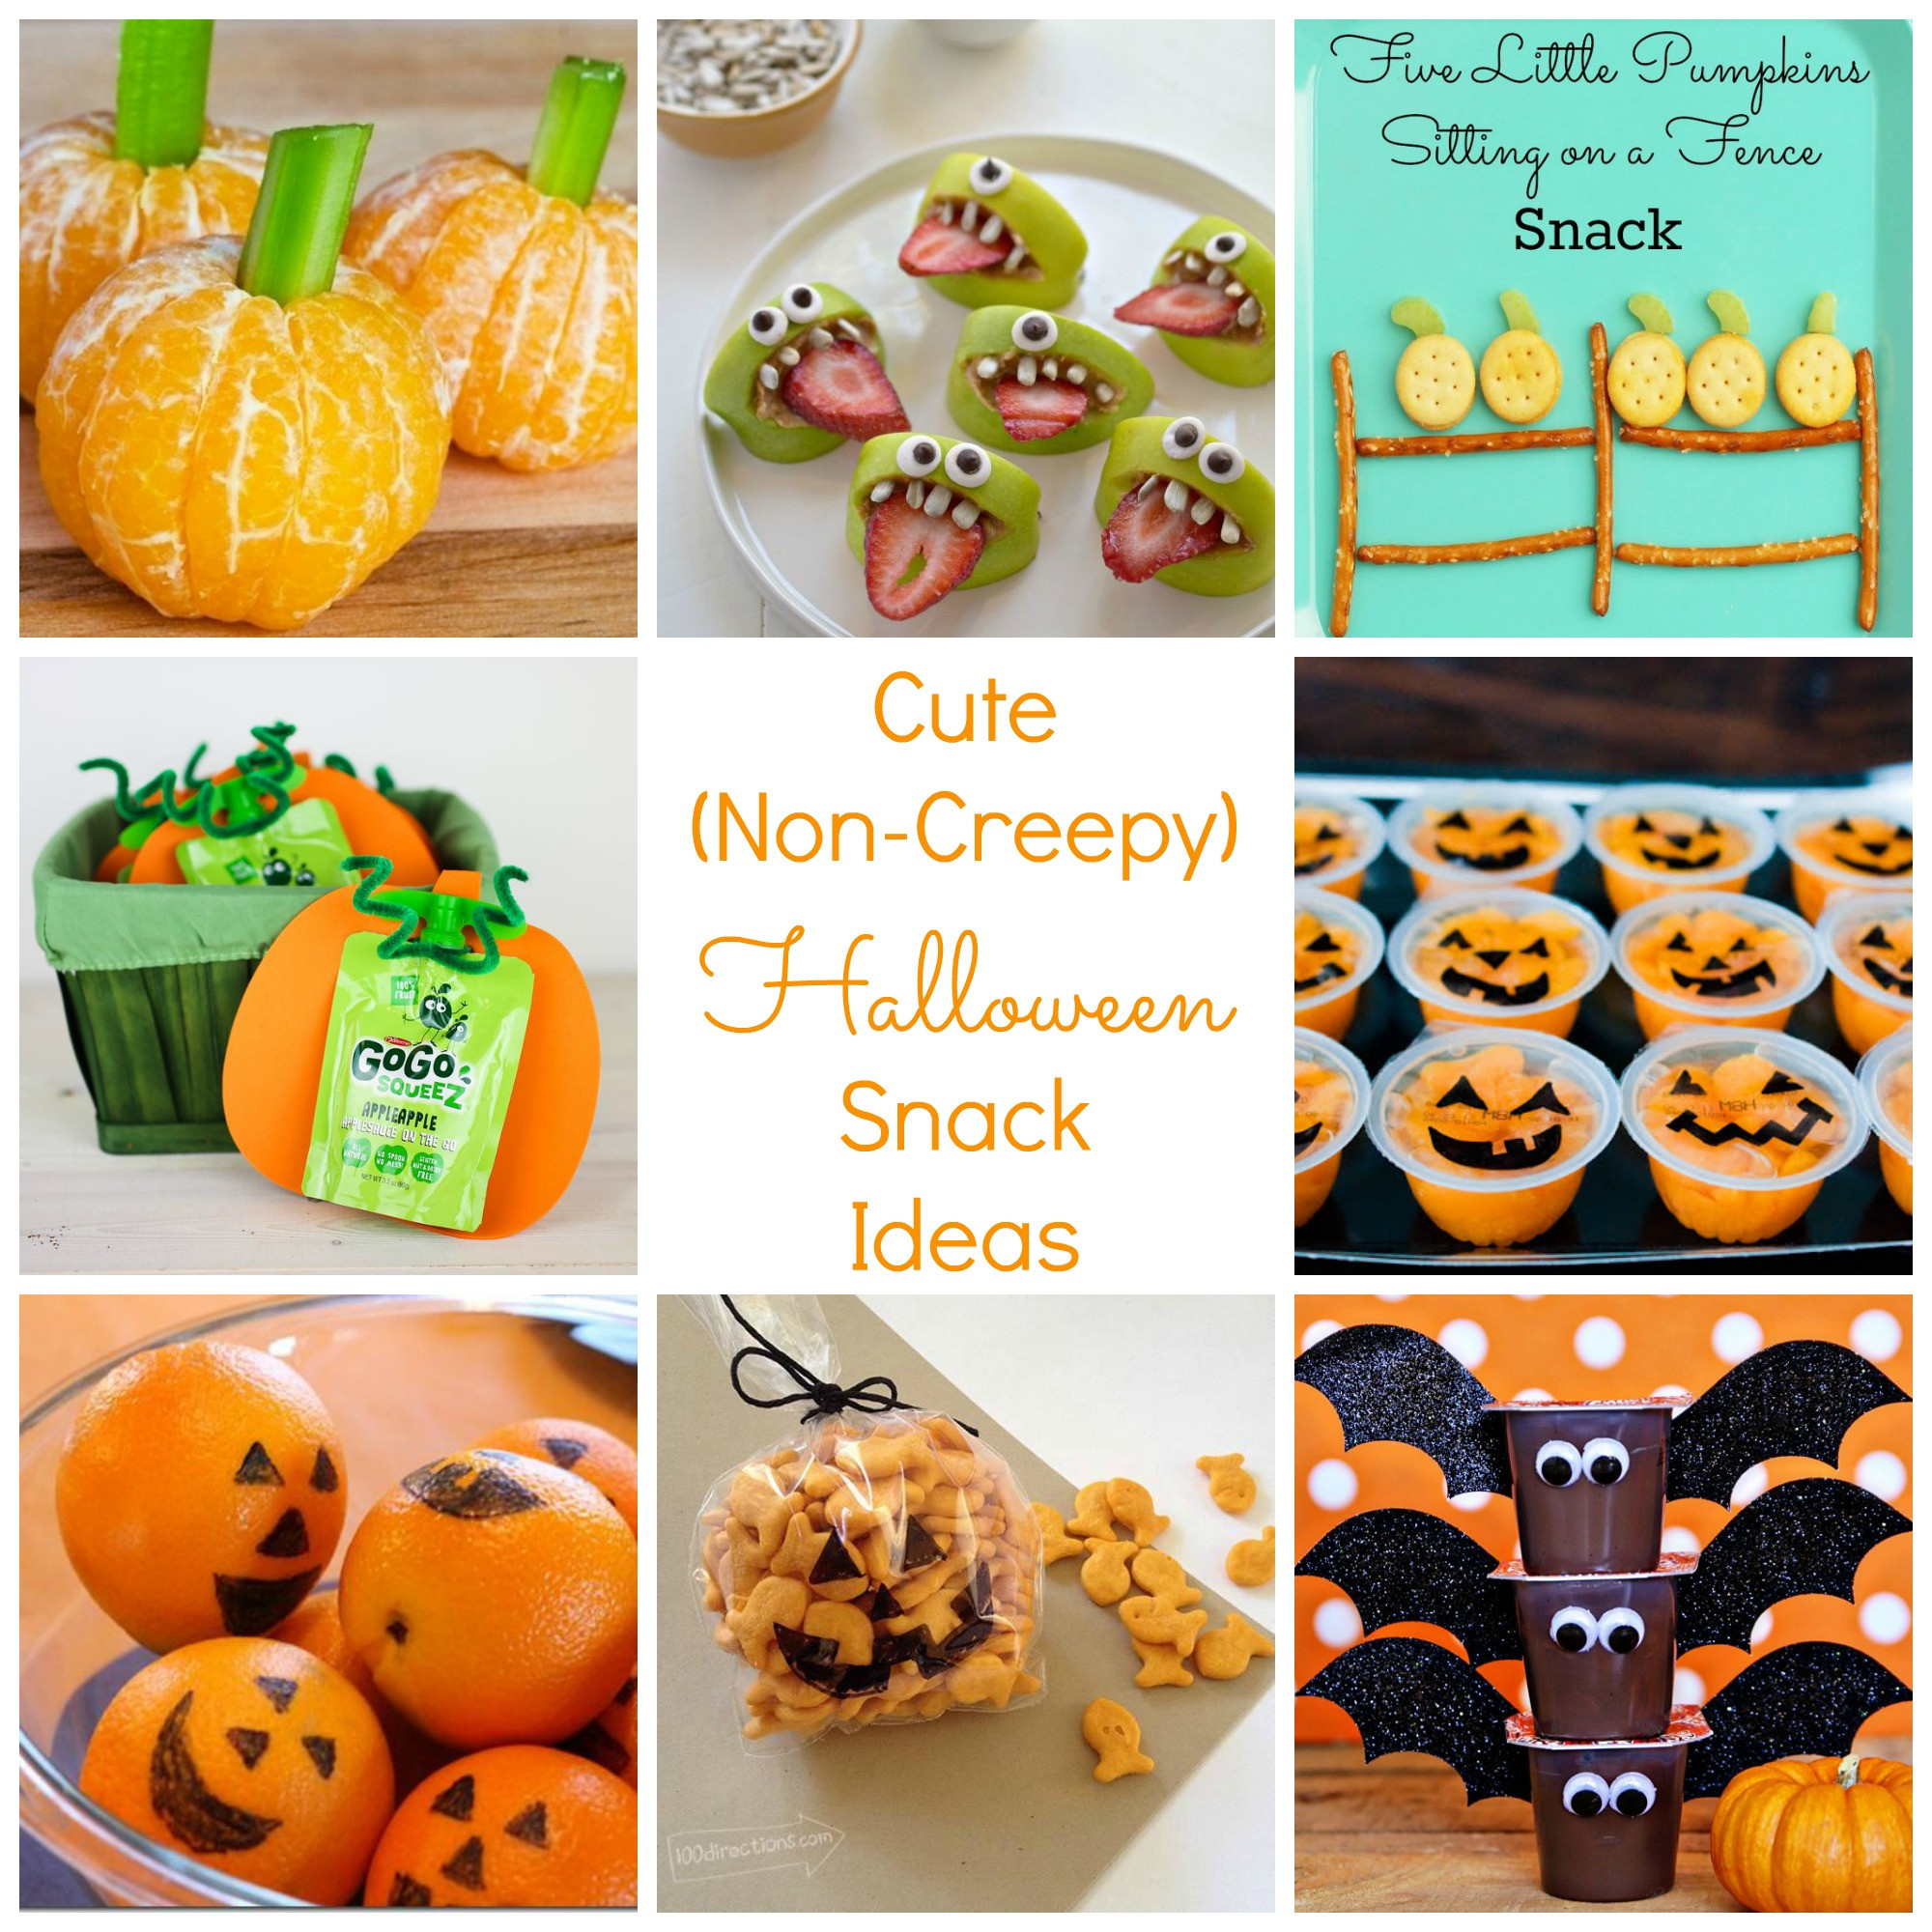 Cute Halloween Food Ideas For A Party
 Cute Non Creepy Halloween and Fall Snack Ideas Happy